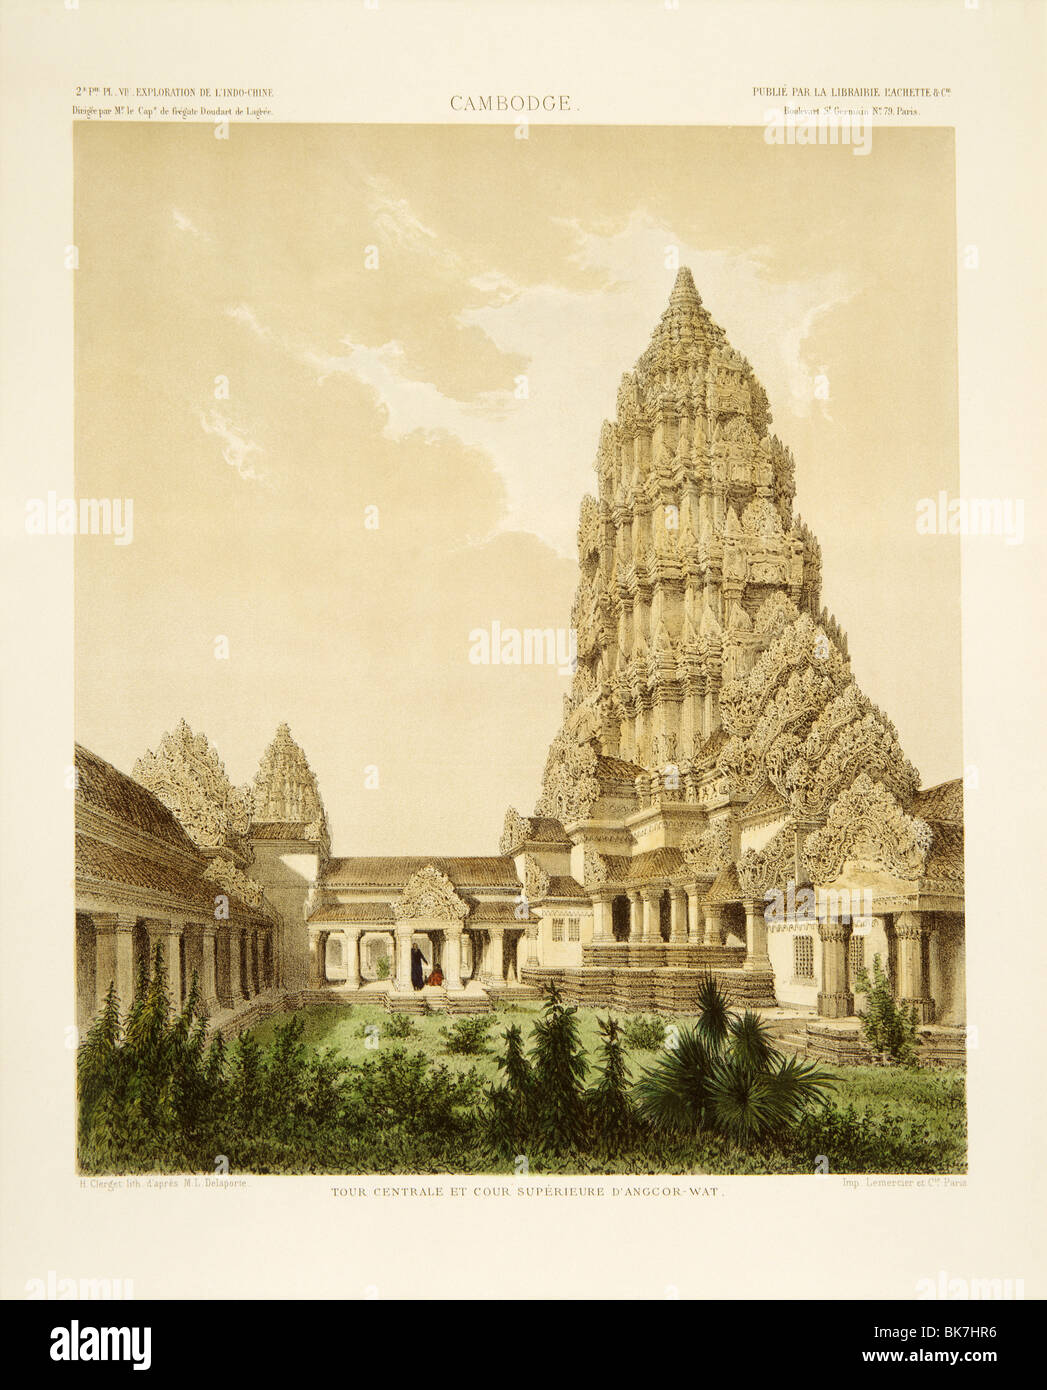 Engraving of Angkor Wat from Exploration de L'Indo-Chine by Delaporte, Cambodia, Indochina, Southeast Asia, Asia Stock Photo